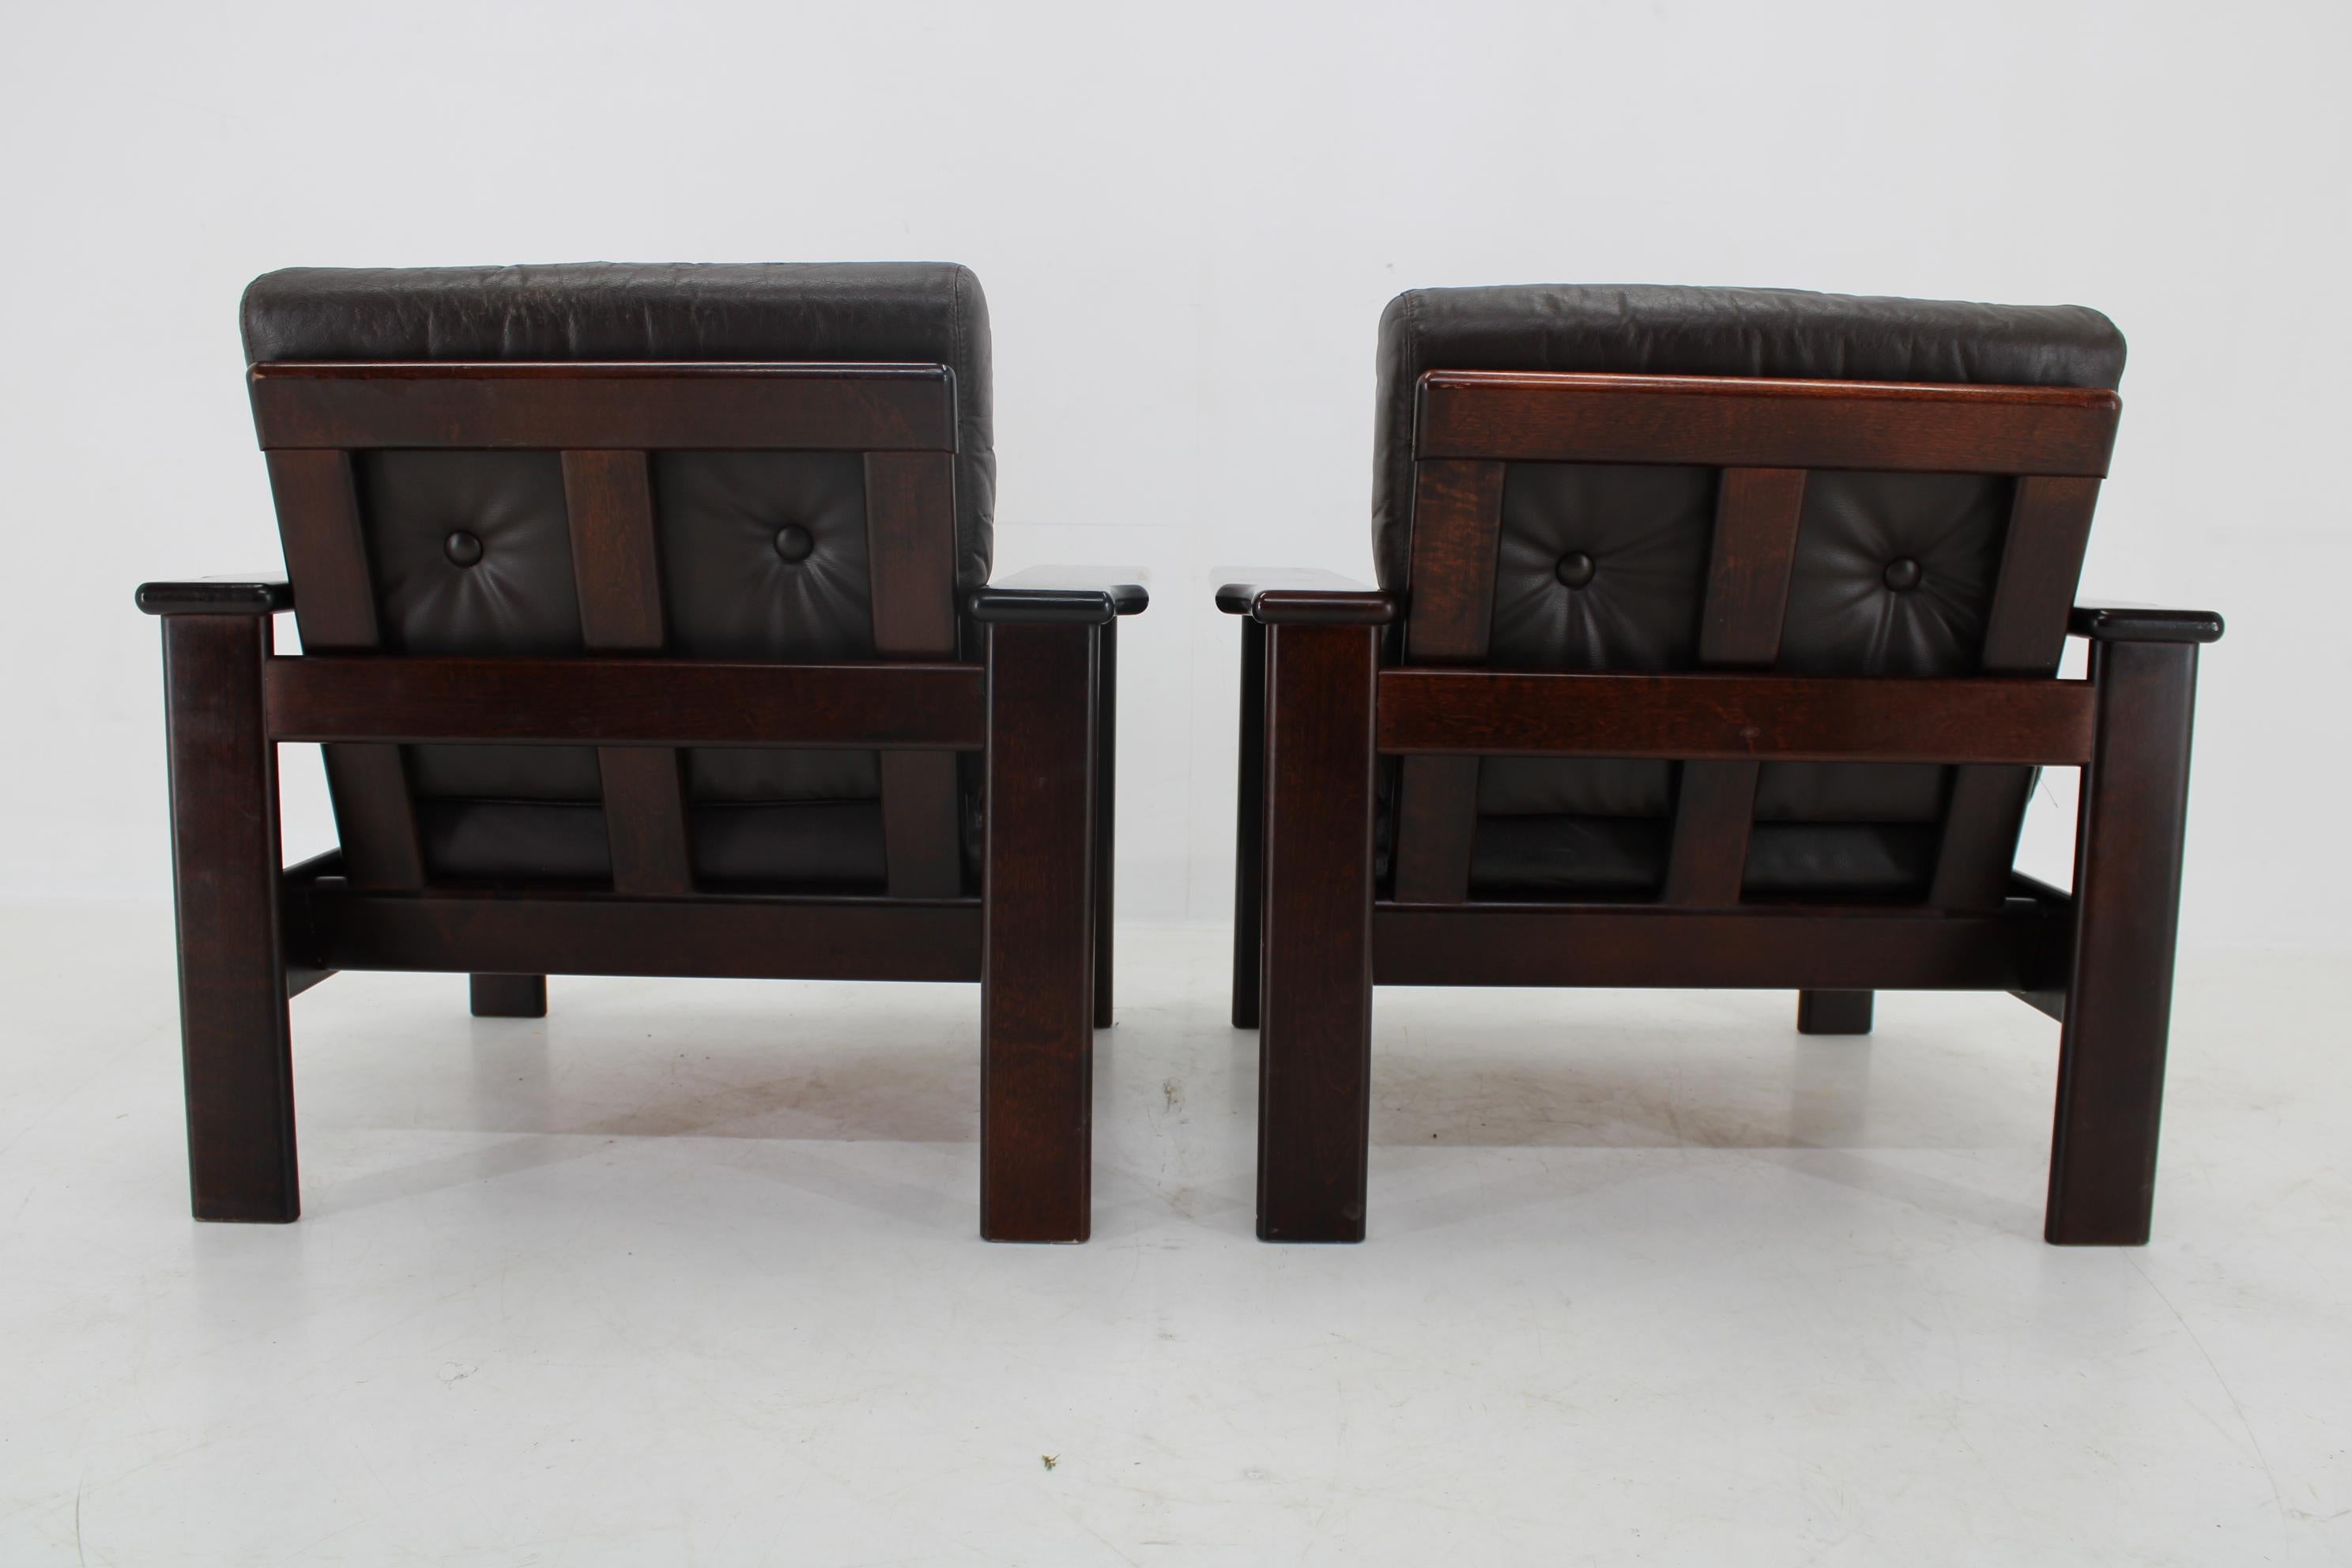 1970s Pair of Leather Armchairs by Lepofinn, Finland For Sale 10